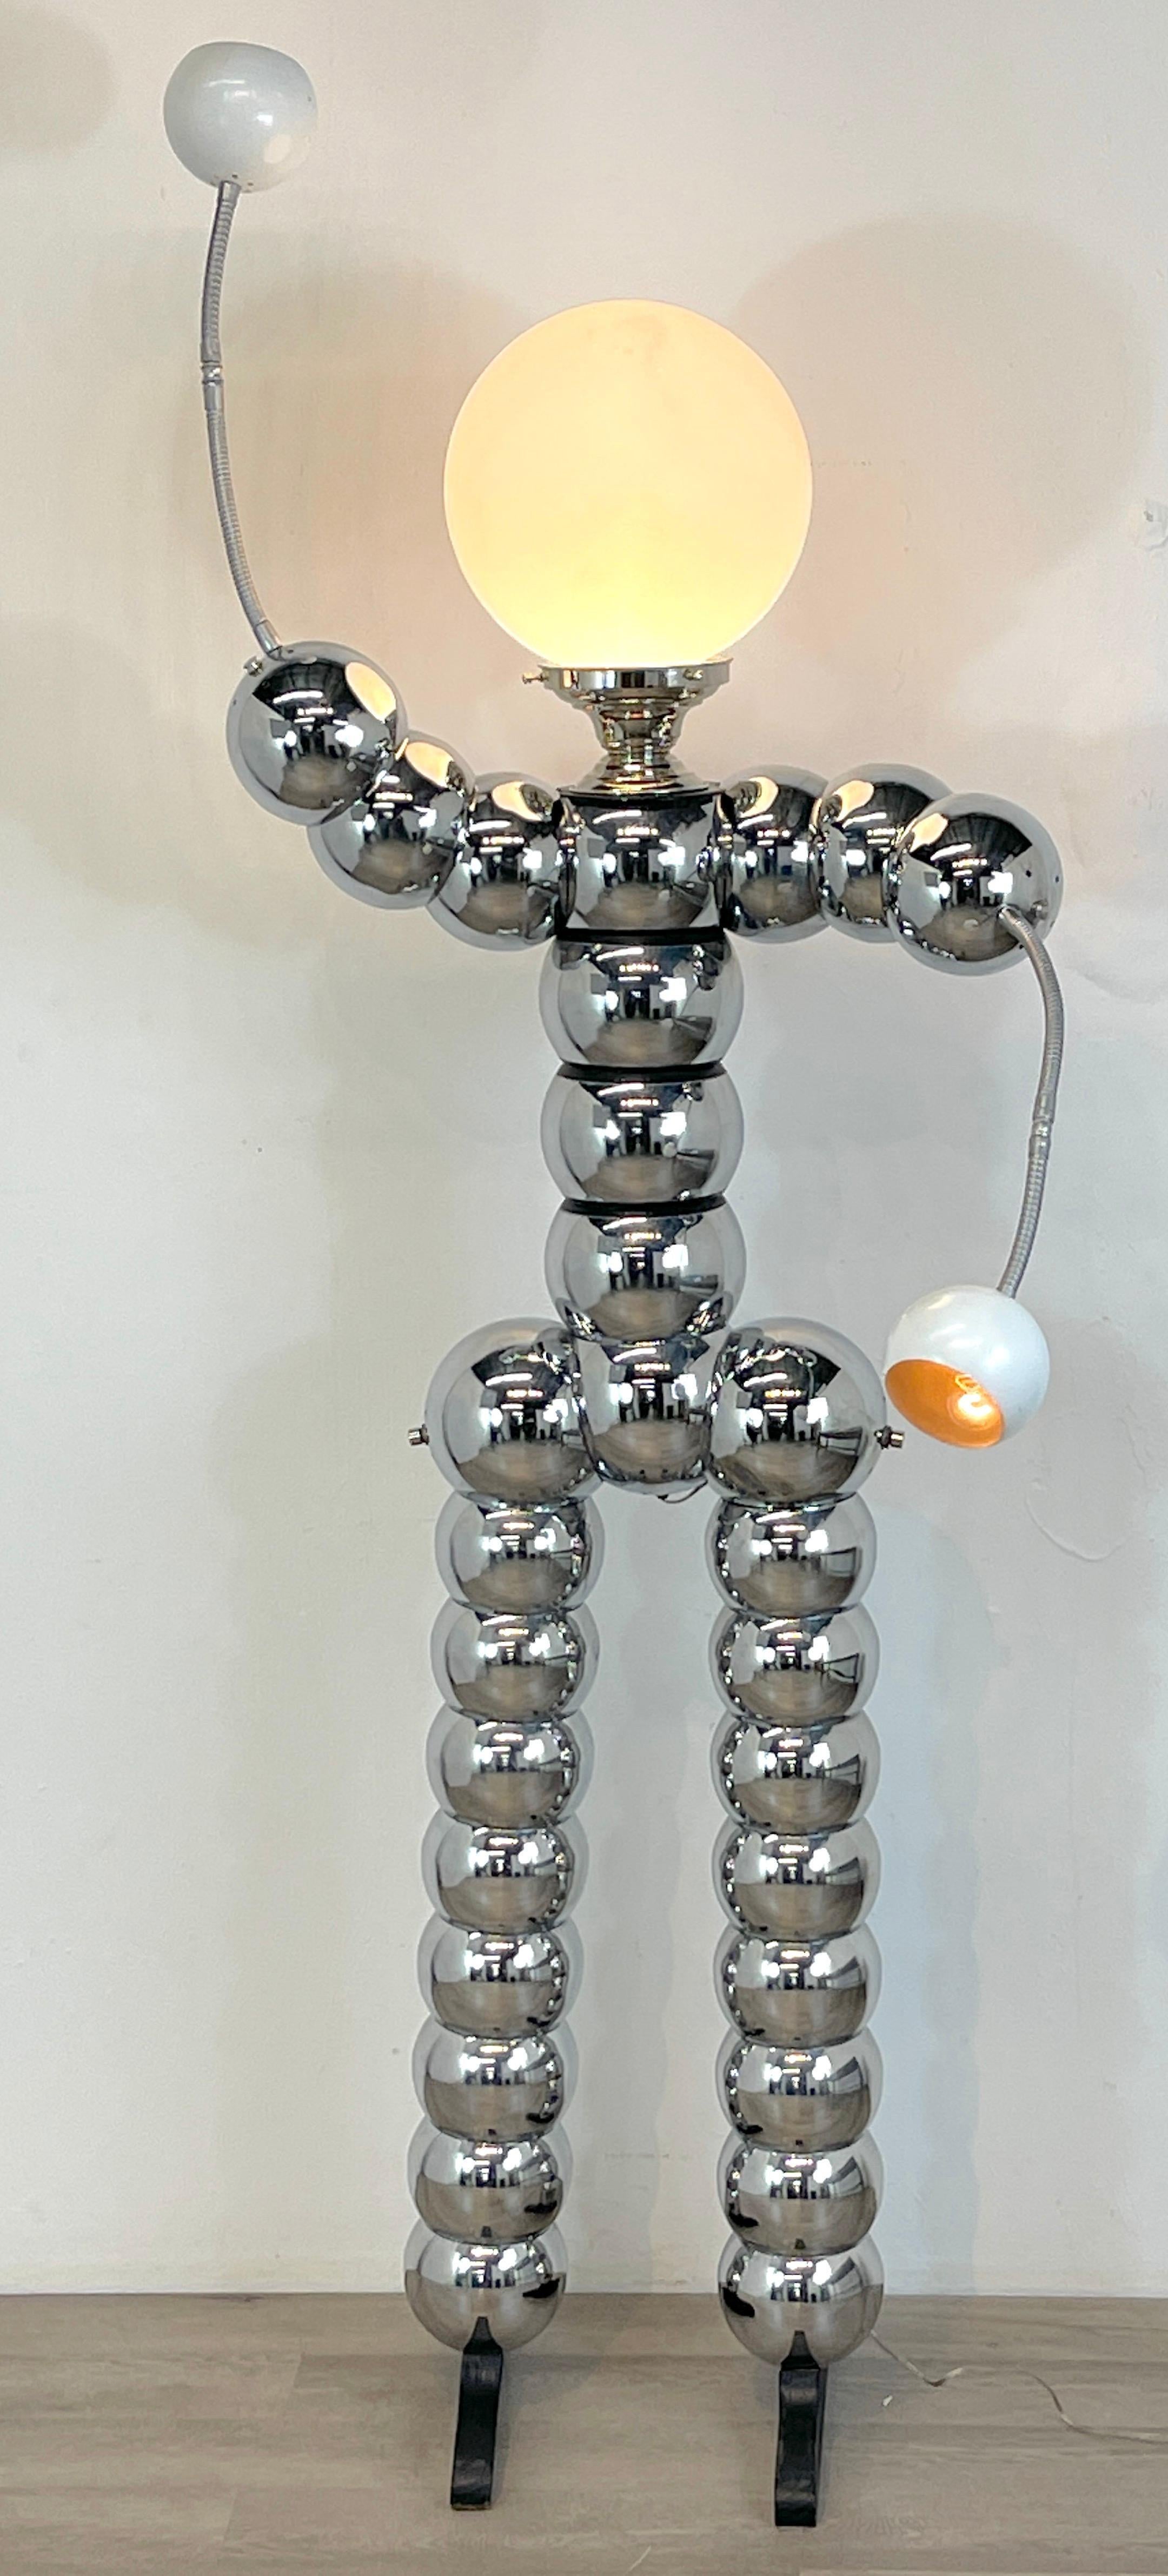 Chrome stacked ball articulated robot floor lamp attributed to George Kovacs
Probably a one of kind showroom display floor lamp, with a 15